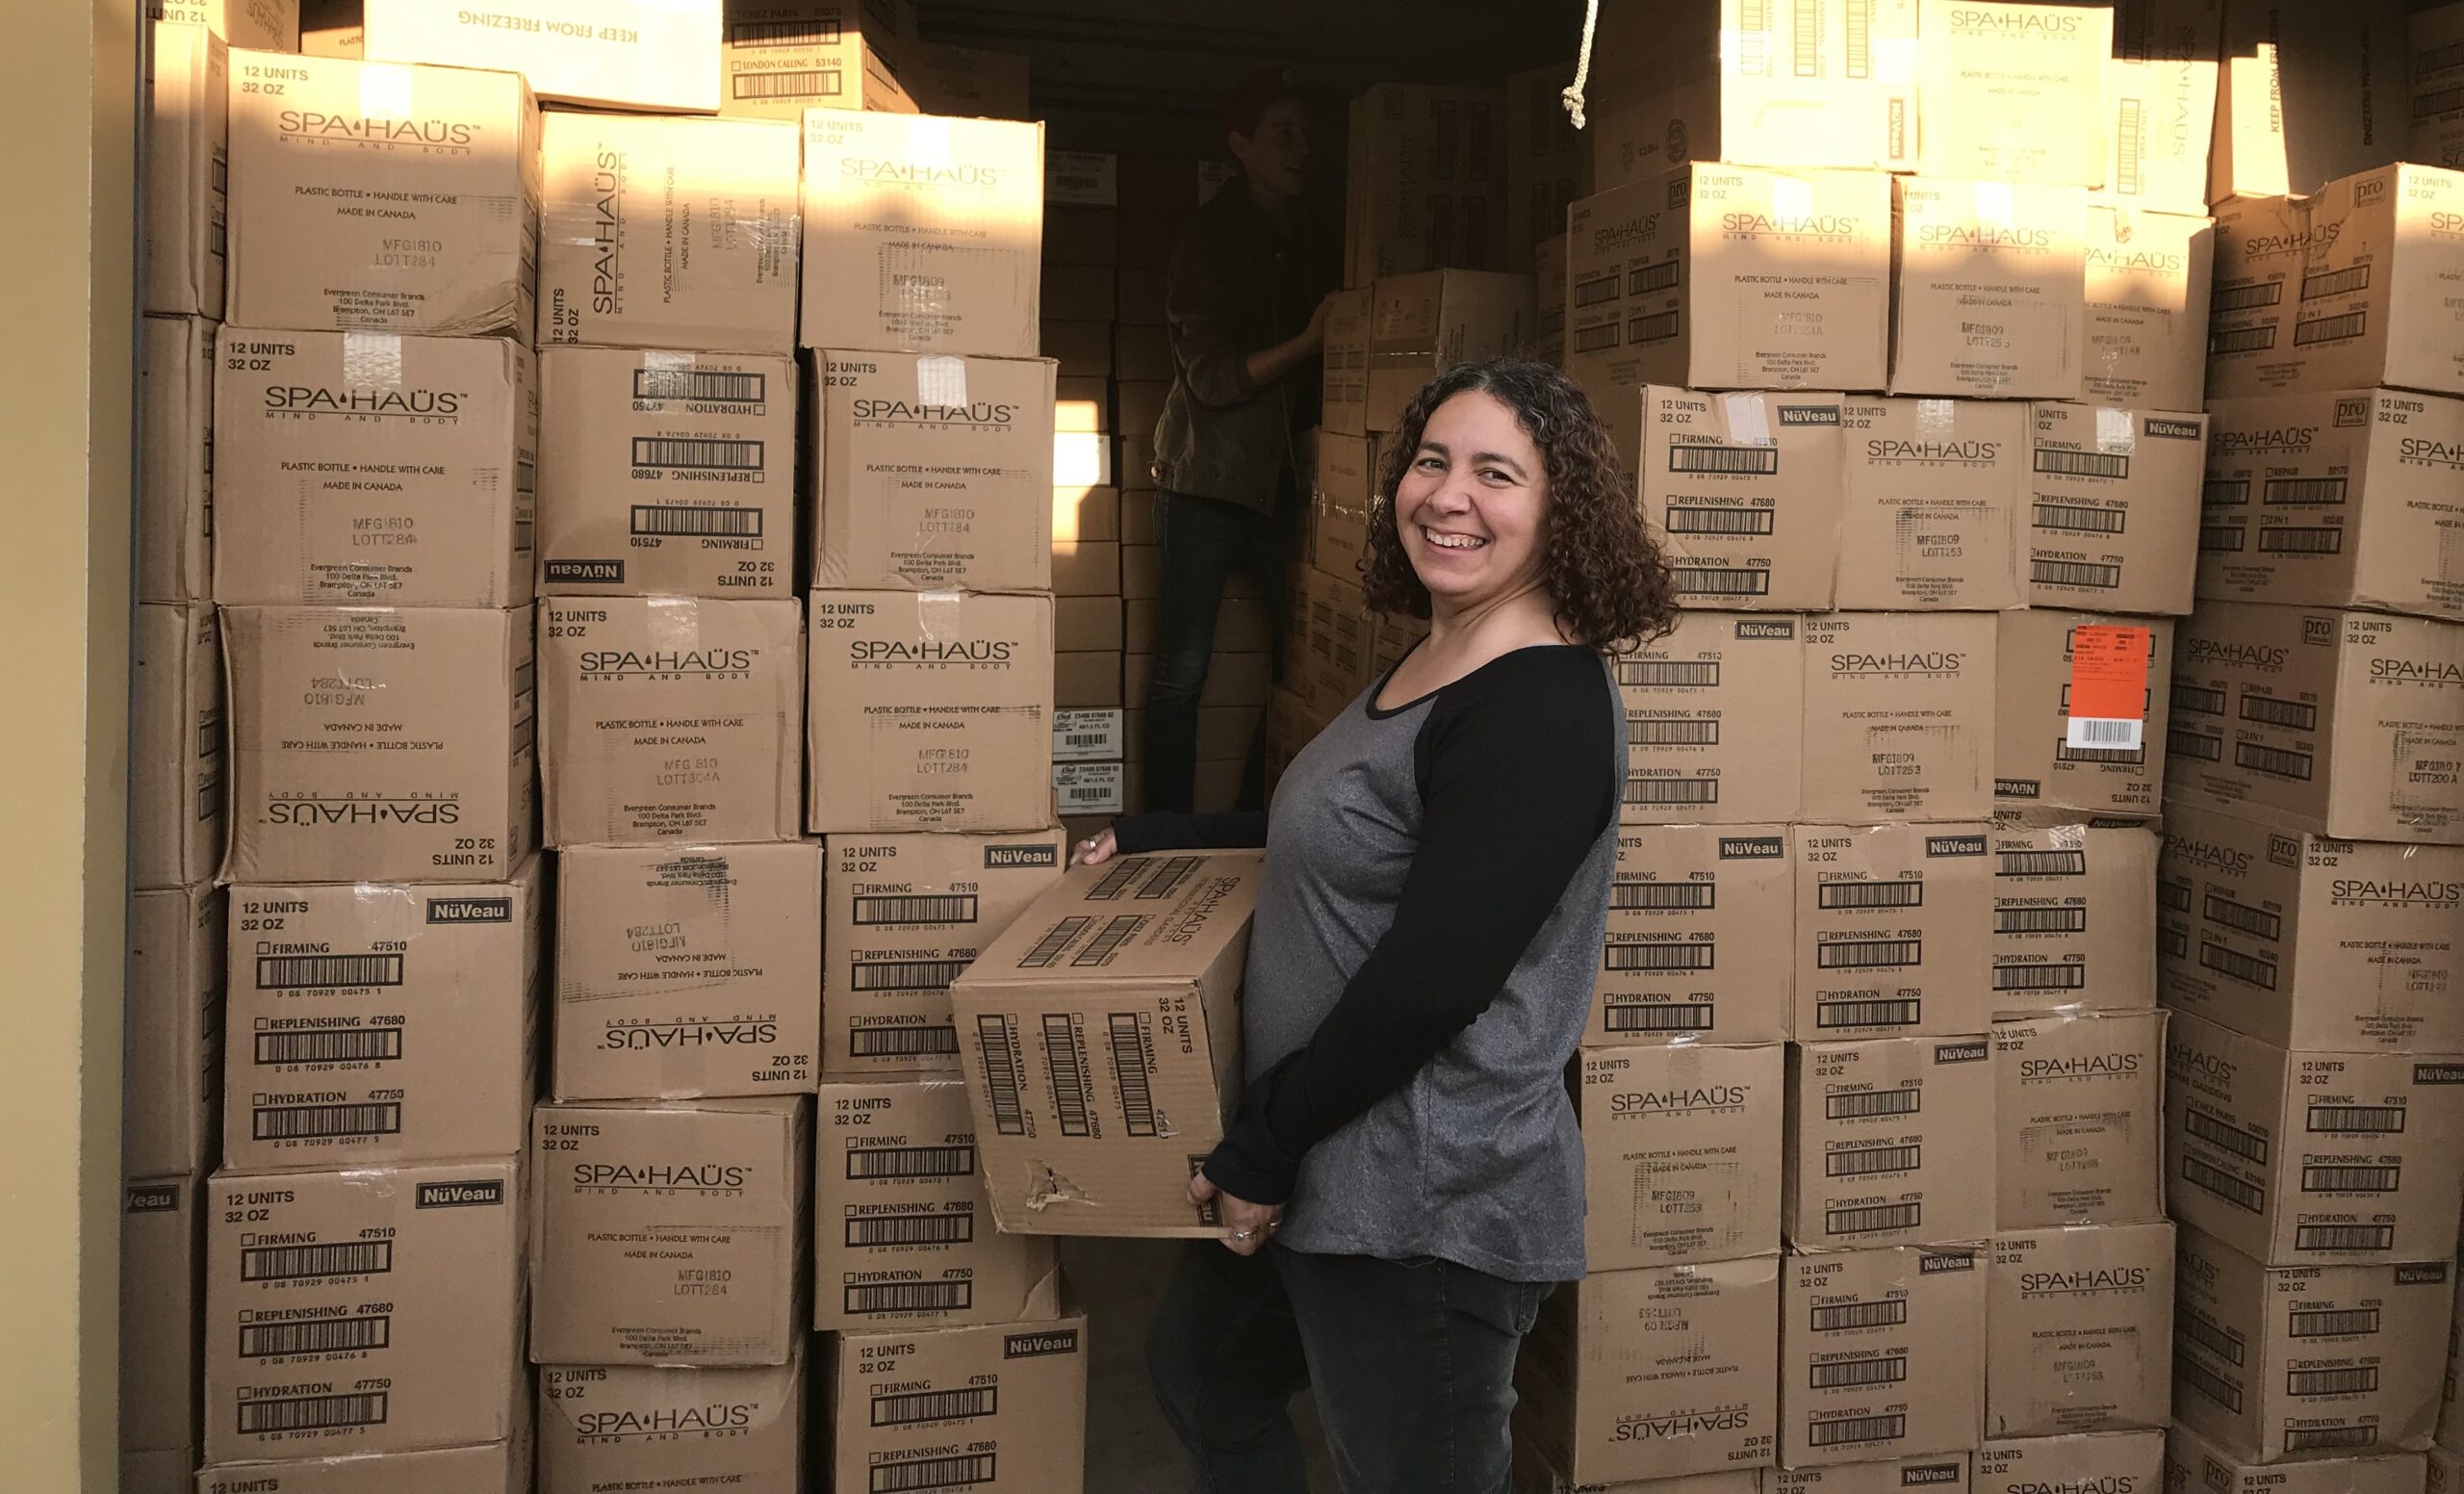 Hannah Overton preparing donations for delivery in 2019. (Image: Debi Brinker/Syndeo Ministries)